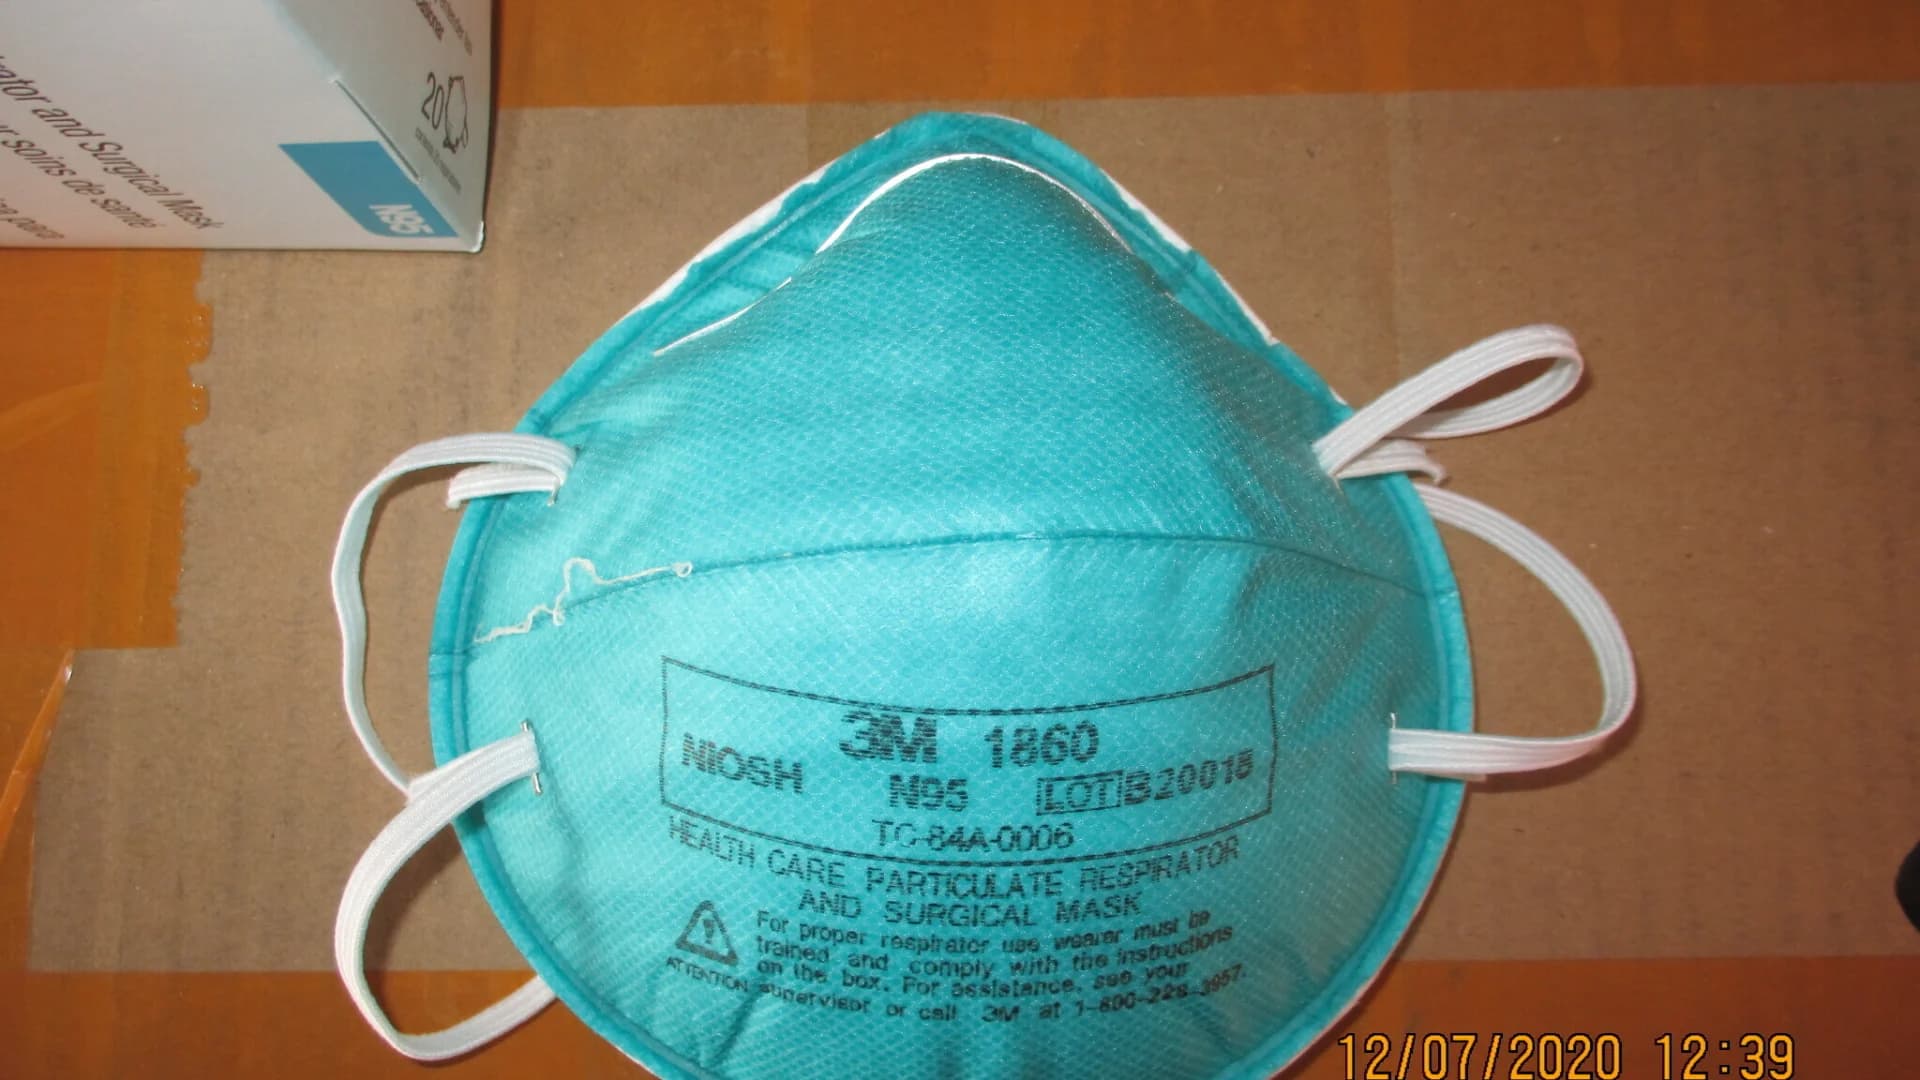 US government seizes roughly 10M phony N95 masks in COVID-19 probe